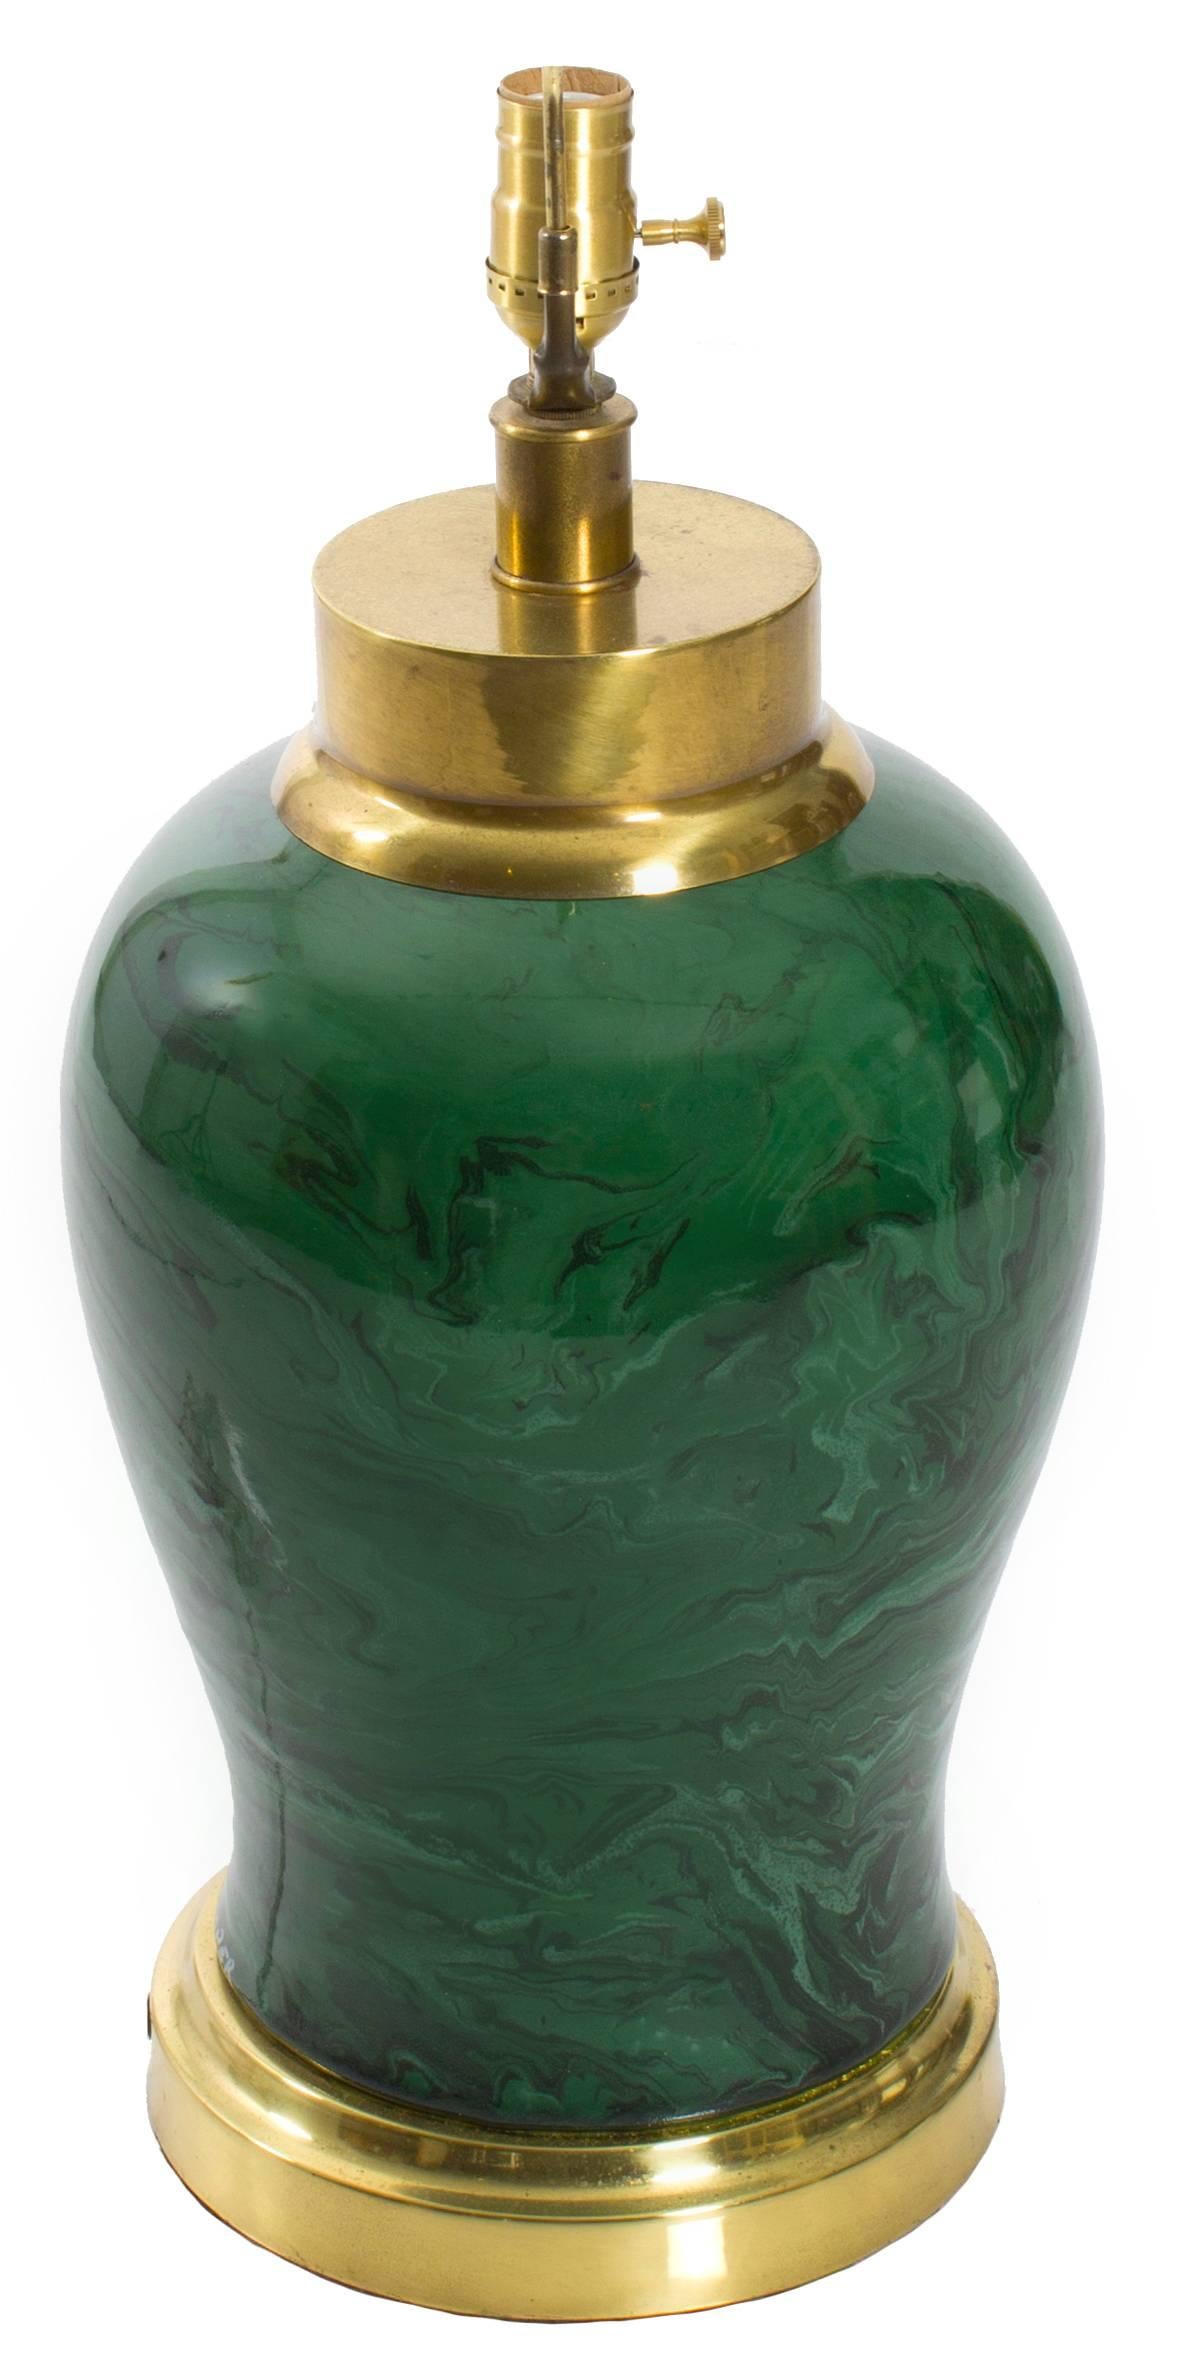 Green ceramic malachite lamp by Frederick Cooper. Brass fittings with overall unpolished patina. Newly rewired. Takes one standard bulb. Lampshade and harp are not included.